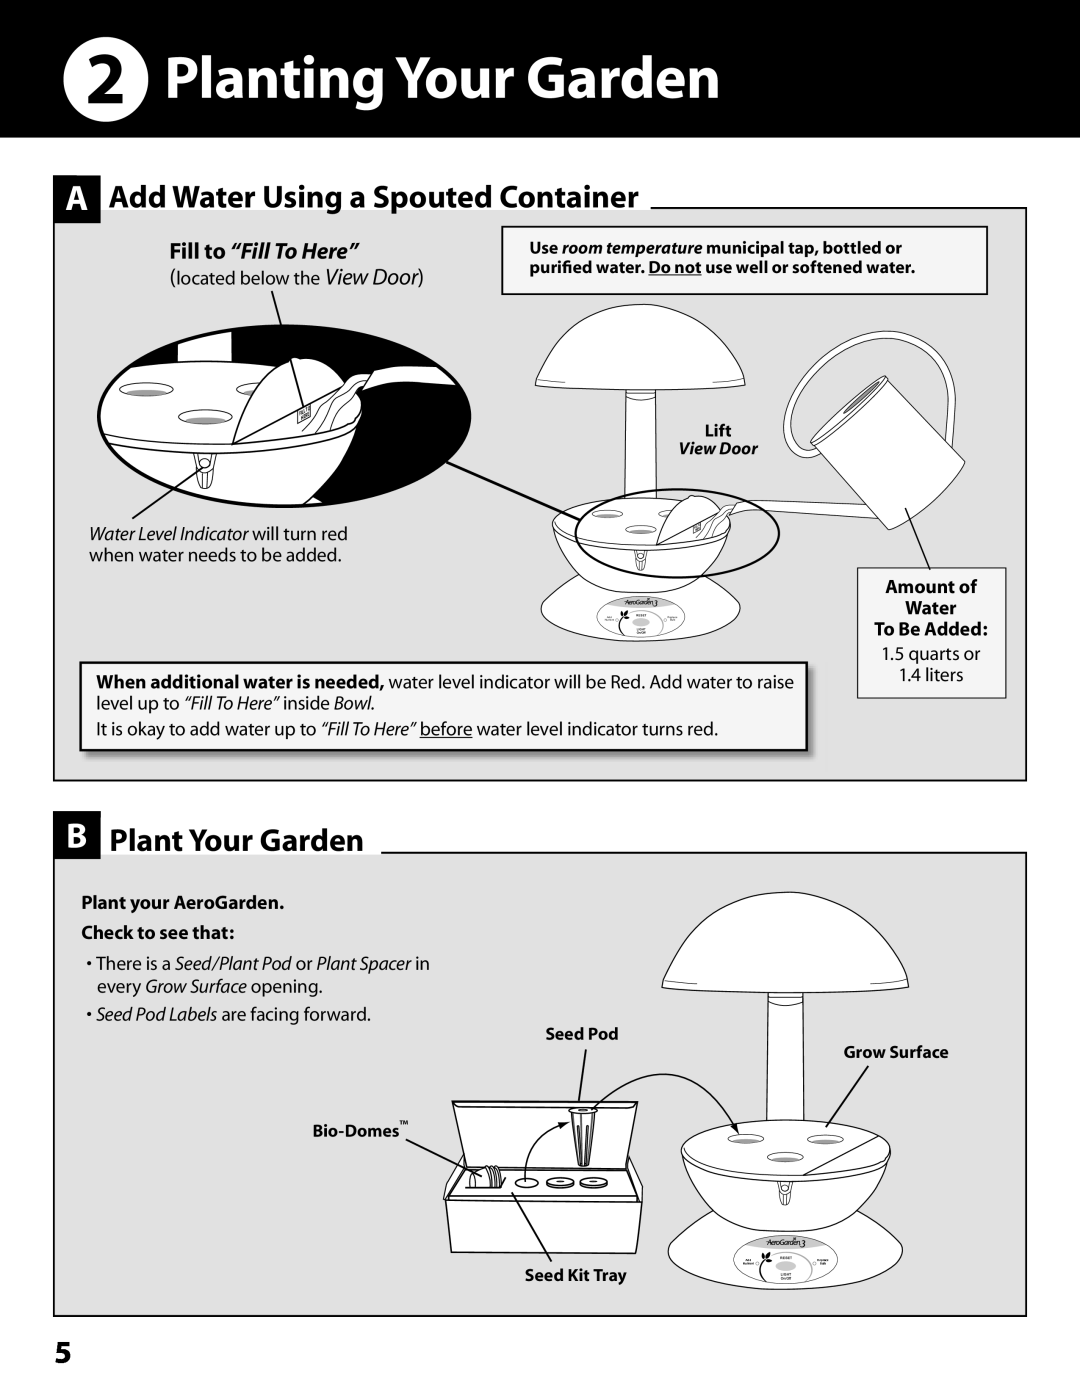 AeroGarden 100302-WHT, 100302-SLR Planting Your Garden, A Add Water Using a Spouted Container, B Plant Your Garden 